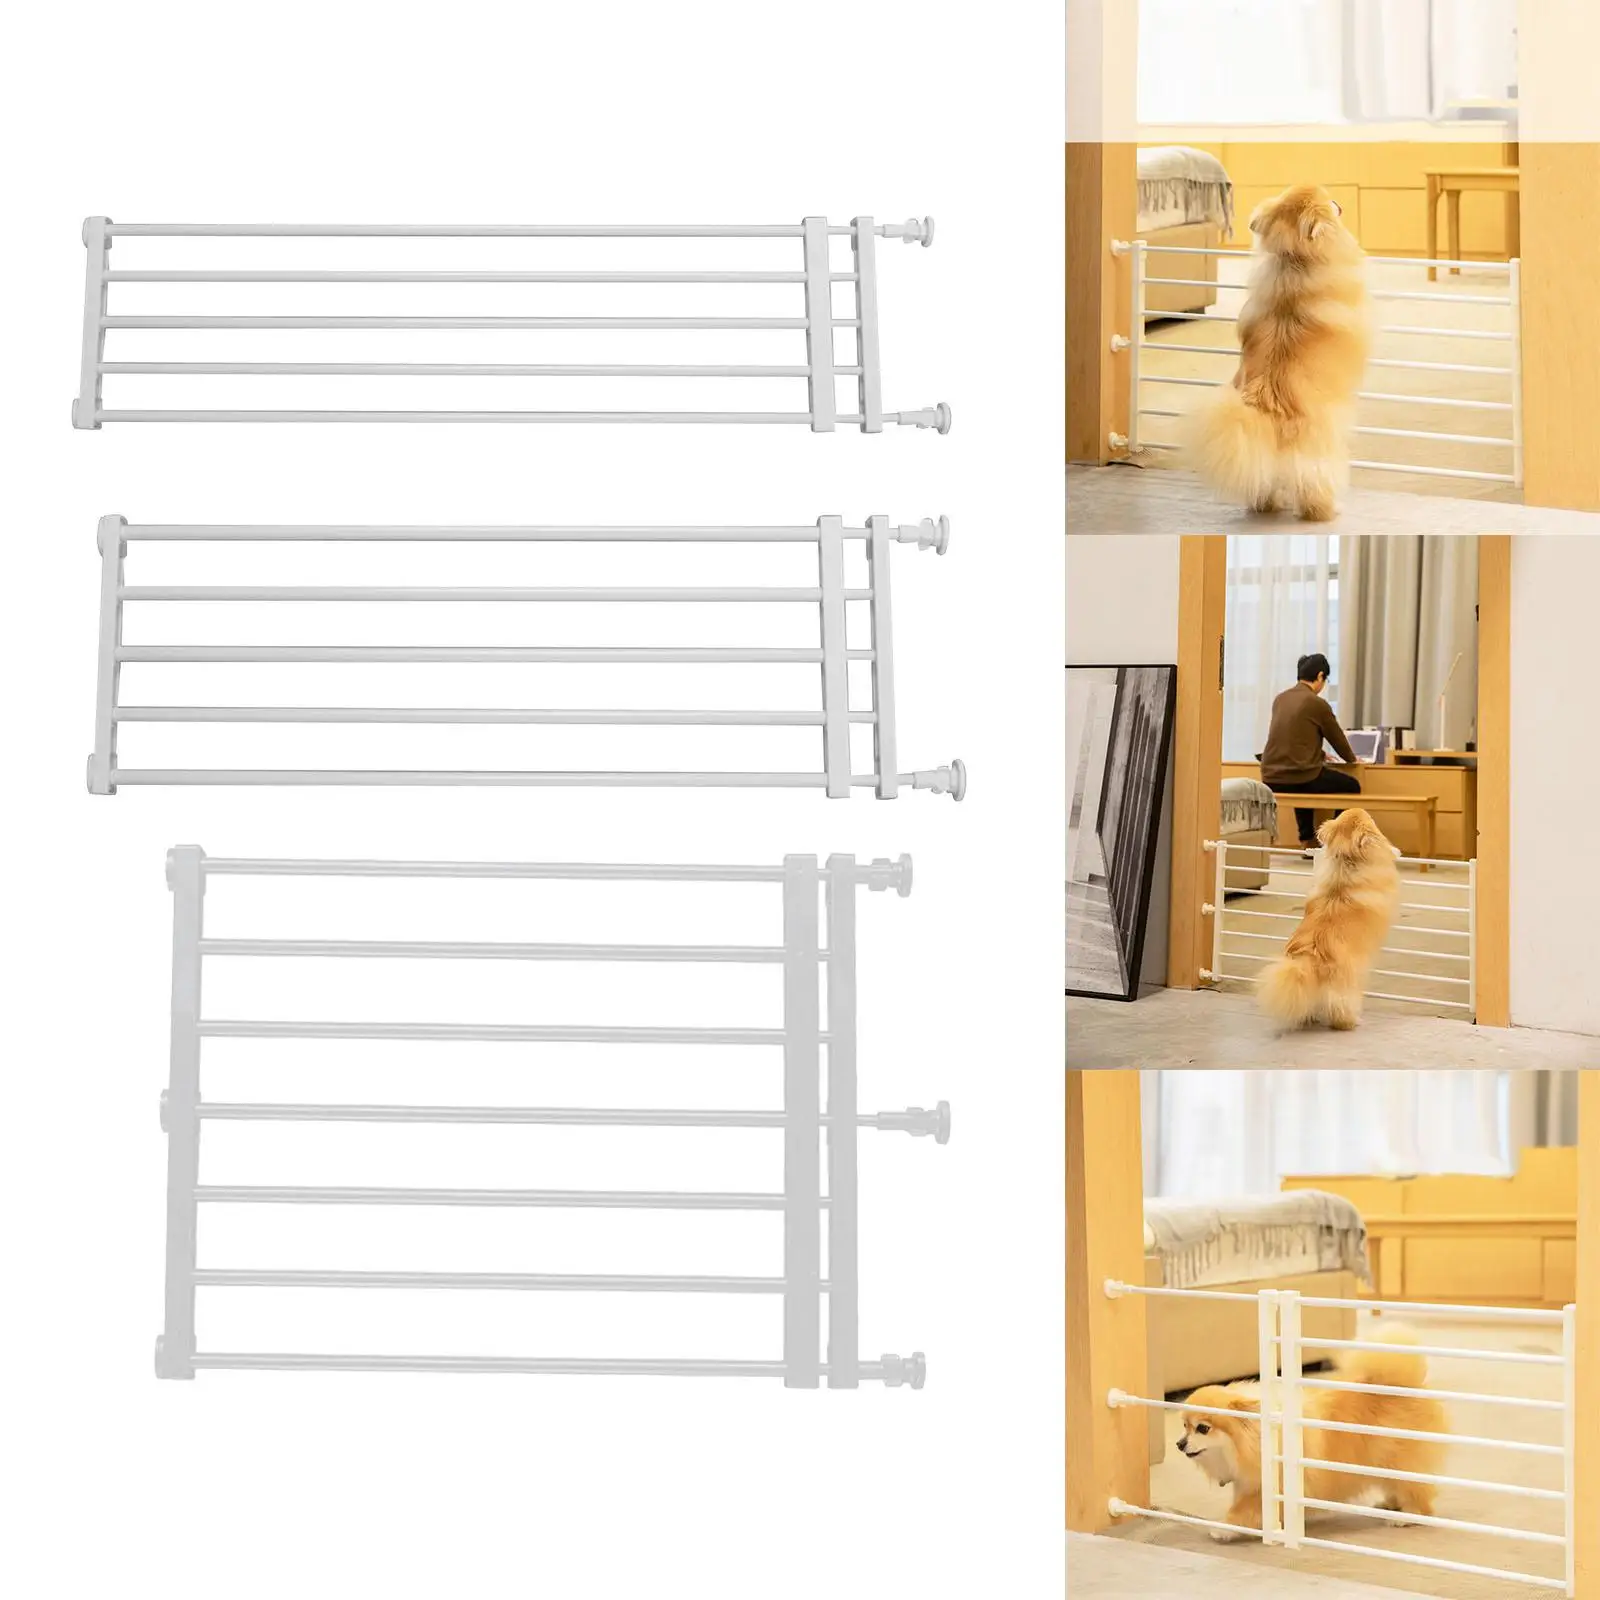 Portable Retractable Pet Dog Gate Child Barrier Screen Door Baby Fence Stair Gate for Small Medium Pet Cat Outdoor Indoor Stairs